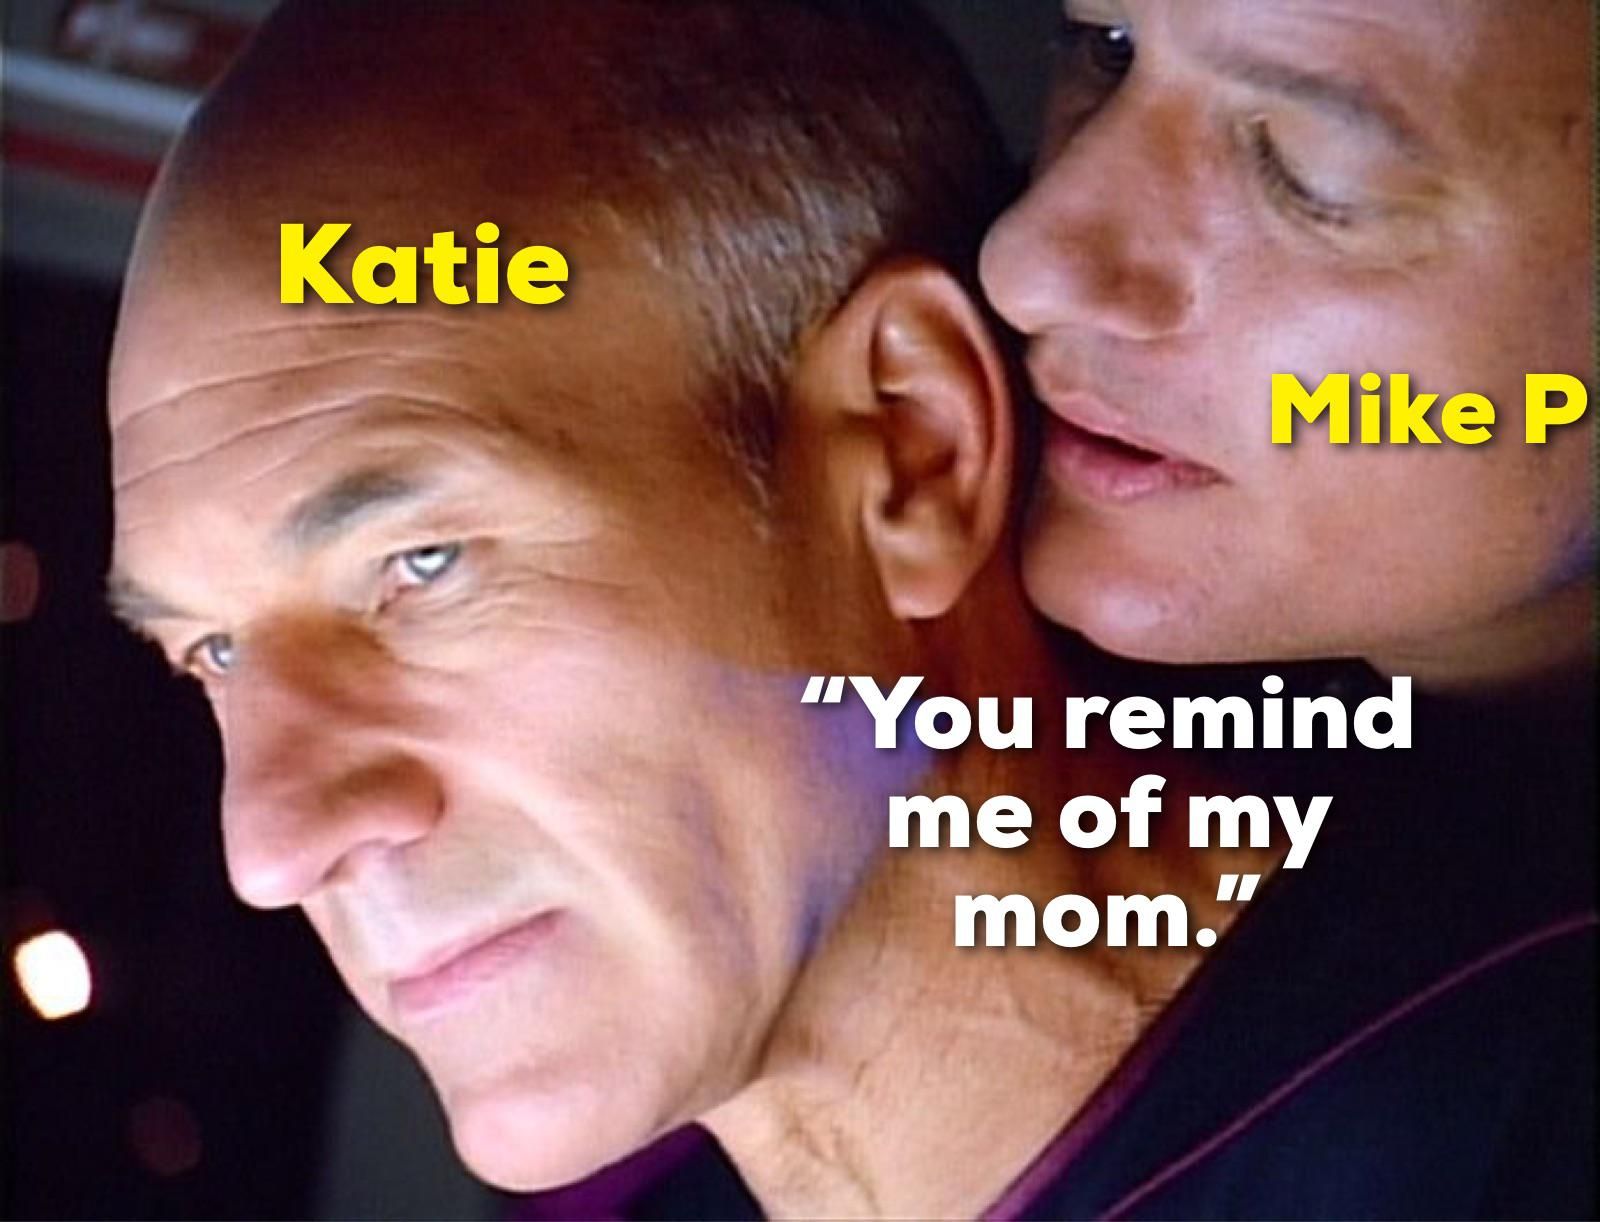 Q whispers in Captain Picard's ear in a meme about Mike P. and Katie from The Bachelorette